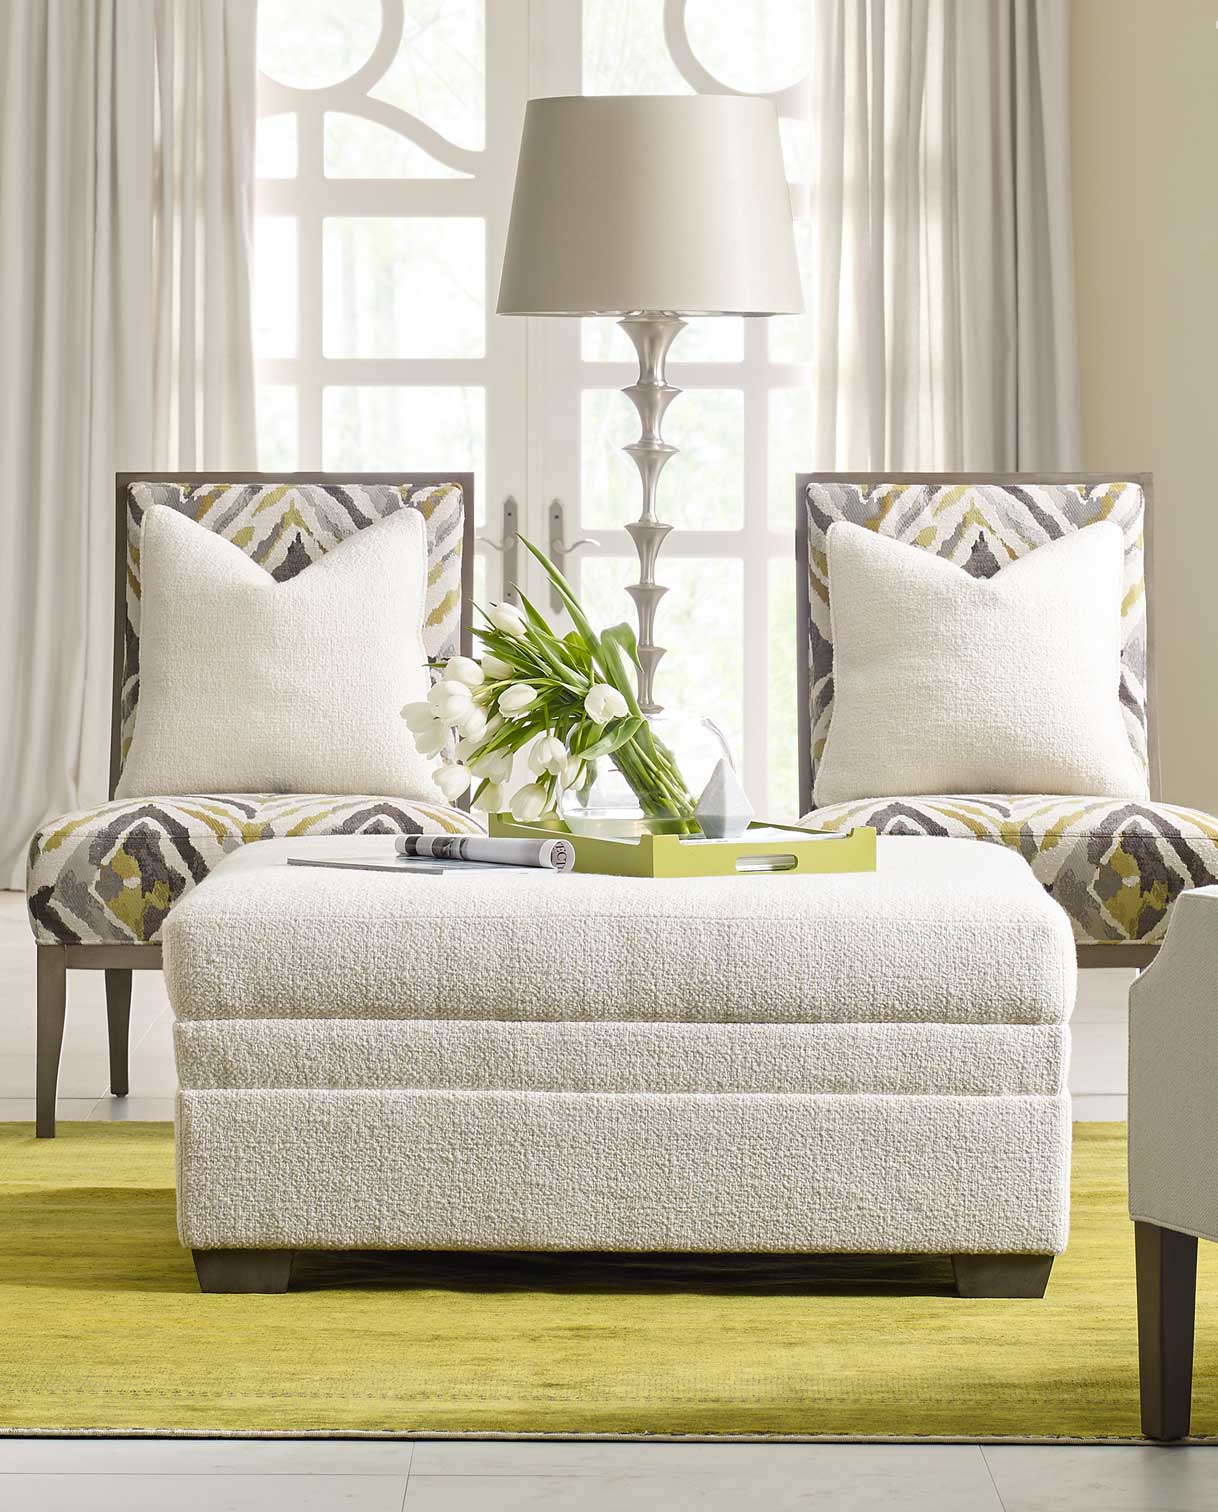 7000 Series white fabric ottoman that has a decorative tray with a small plant in it. The ottoman is sitting on top of a light green rug, with two fabric accent chairs behind it